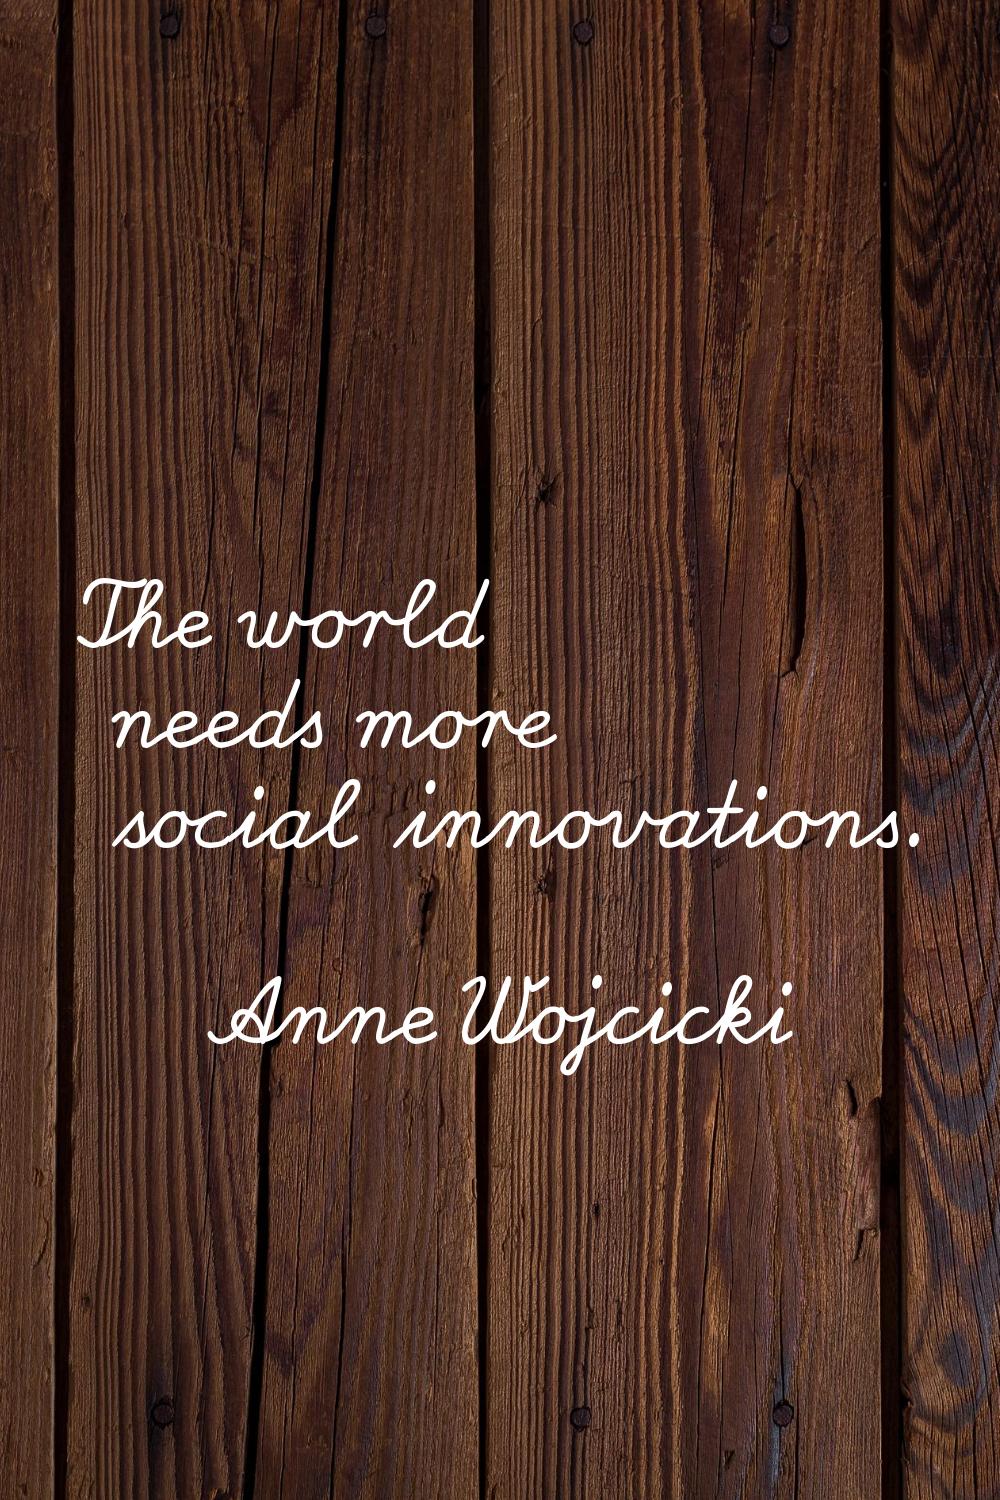 The world needs more social innovations.